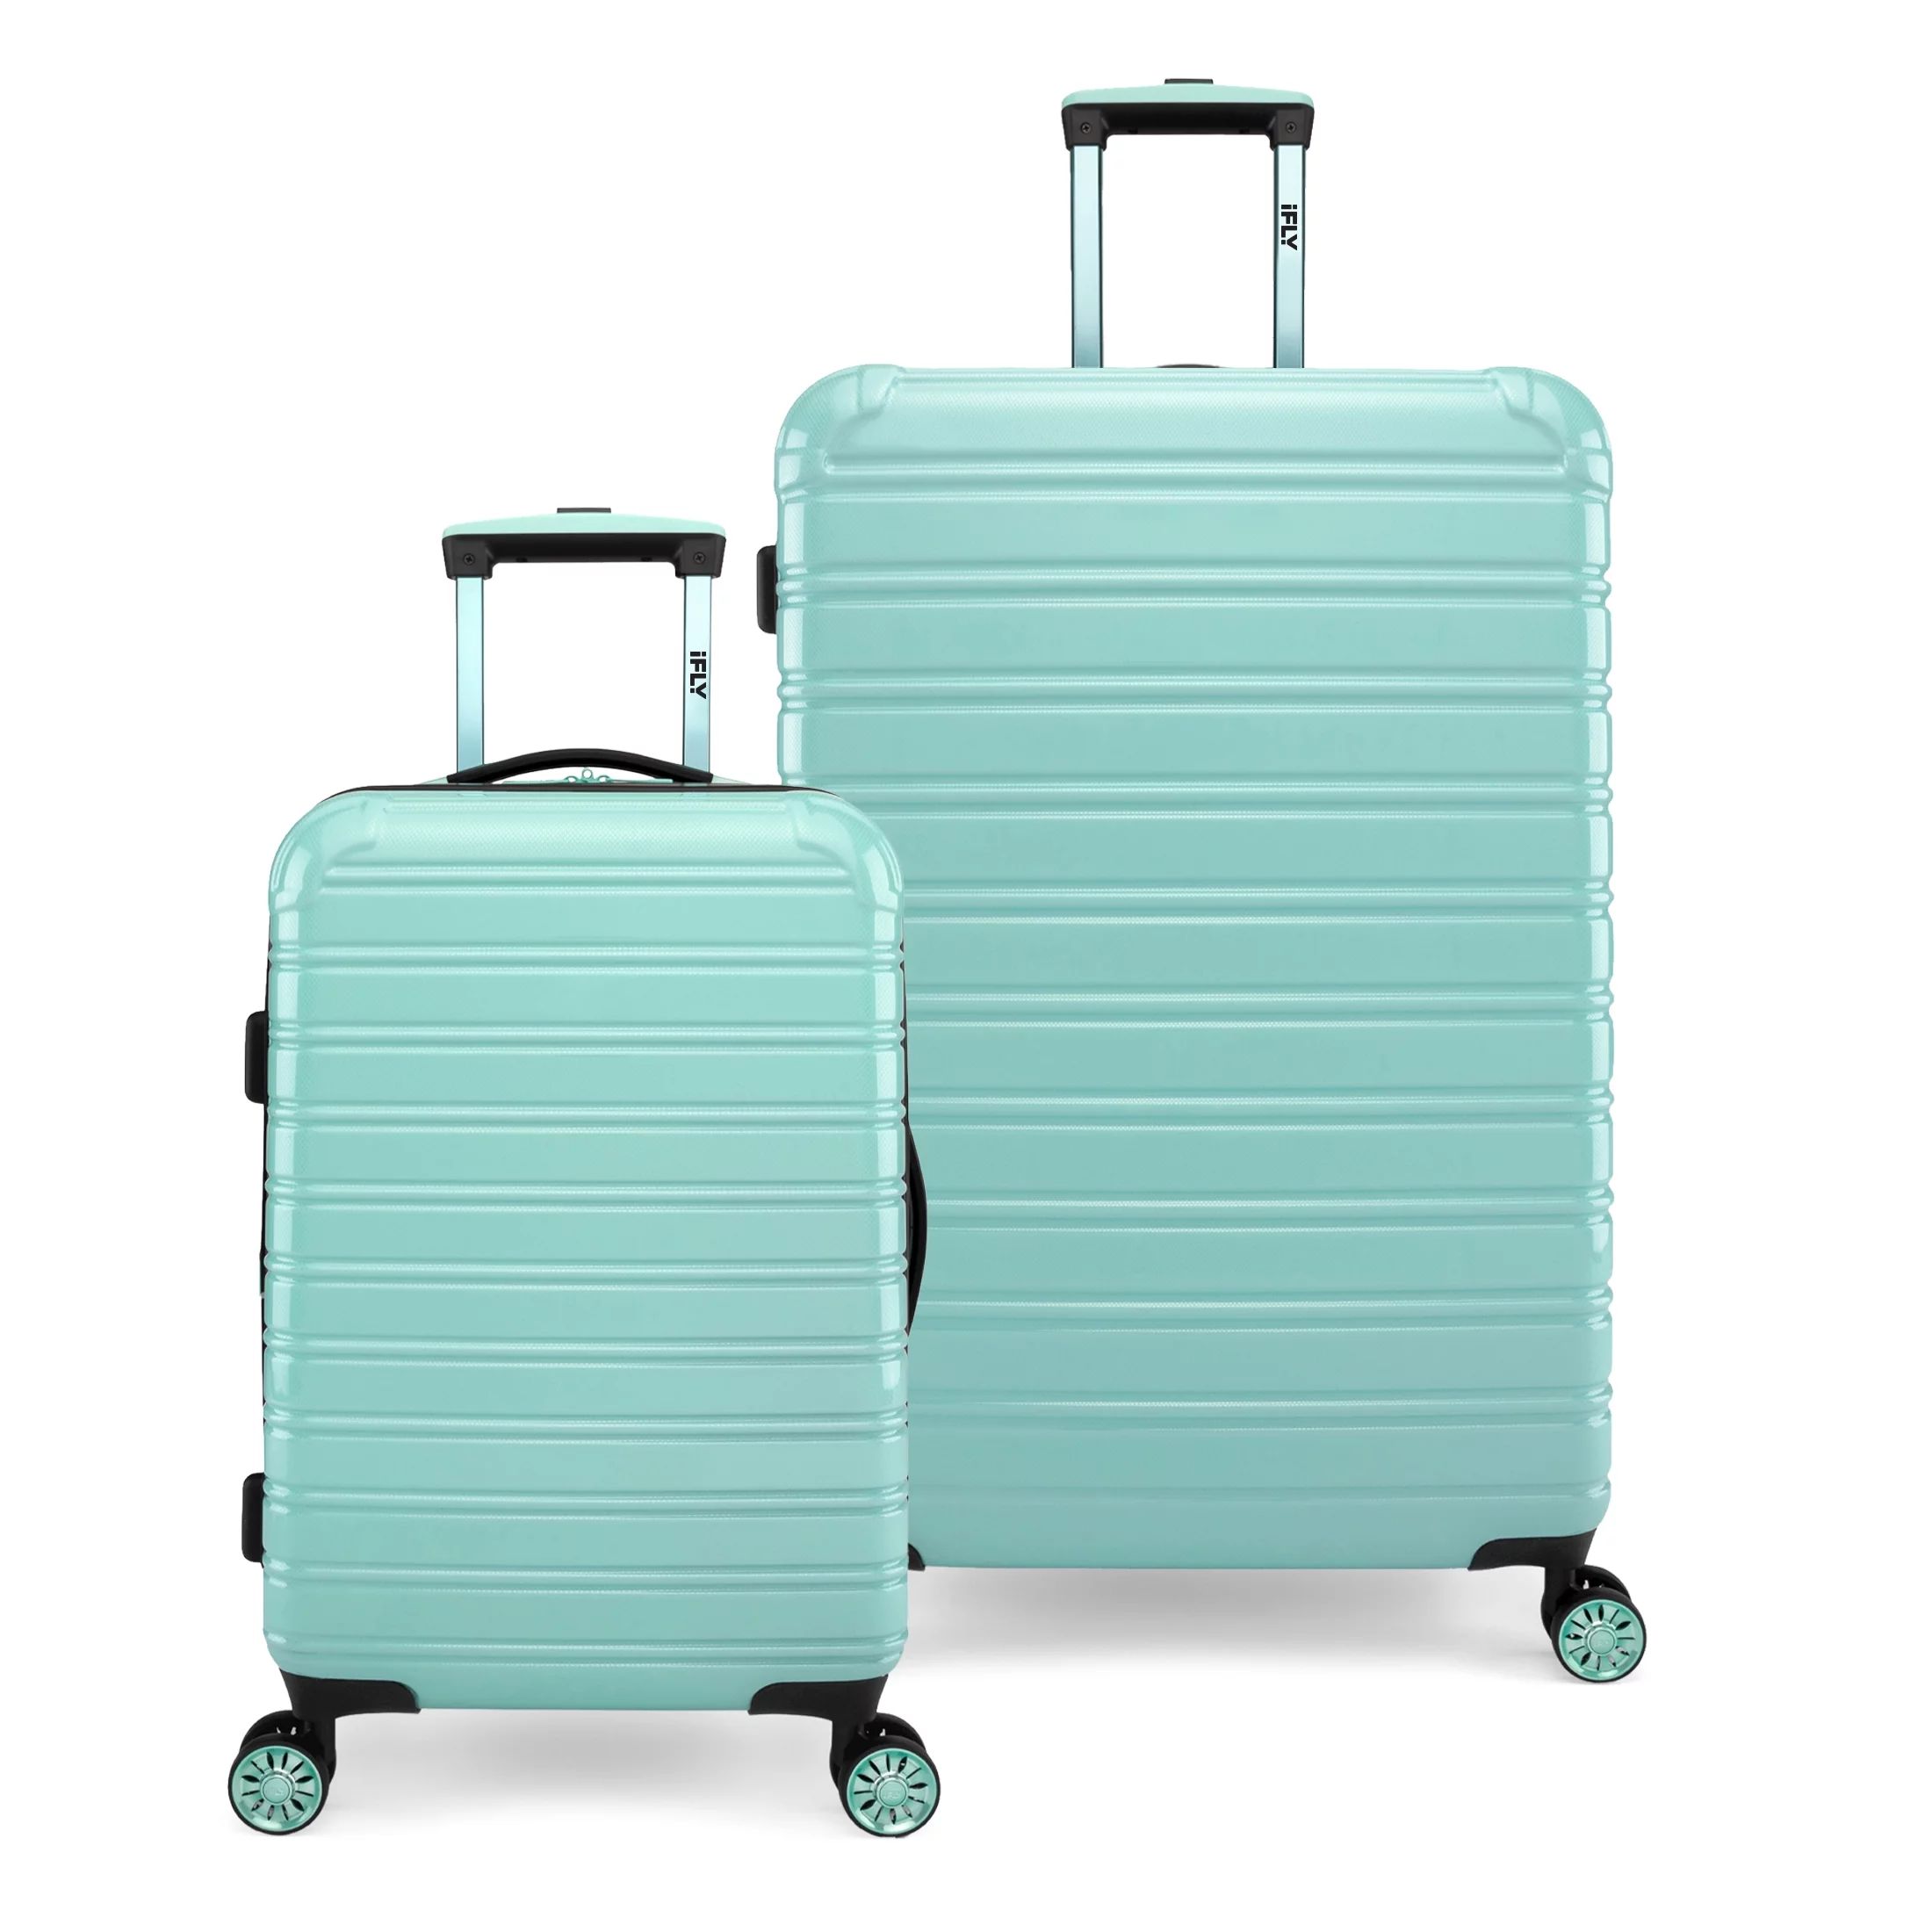 iFLY Hardside Luggage Fibertech 2 Piece Set, 20" Carry-on and 28" Checked Luggage, Mint | Walmart (US)